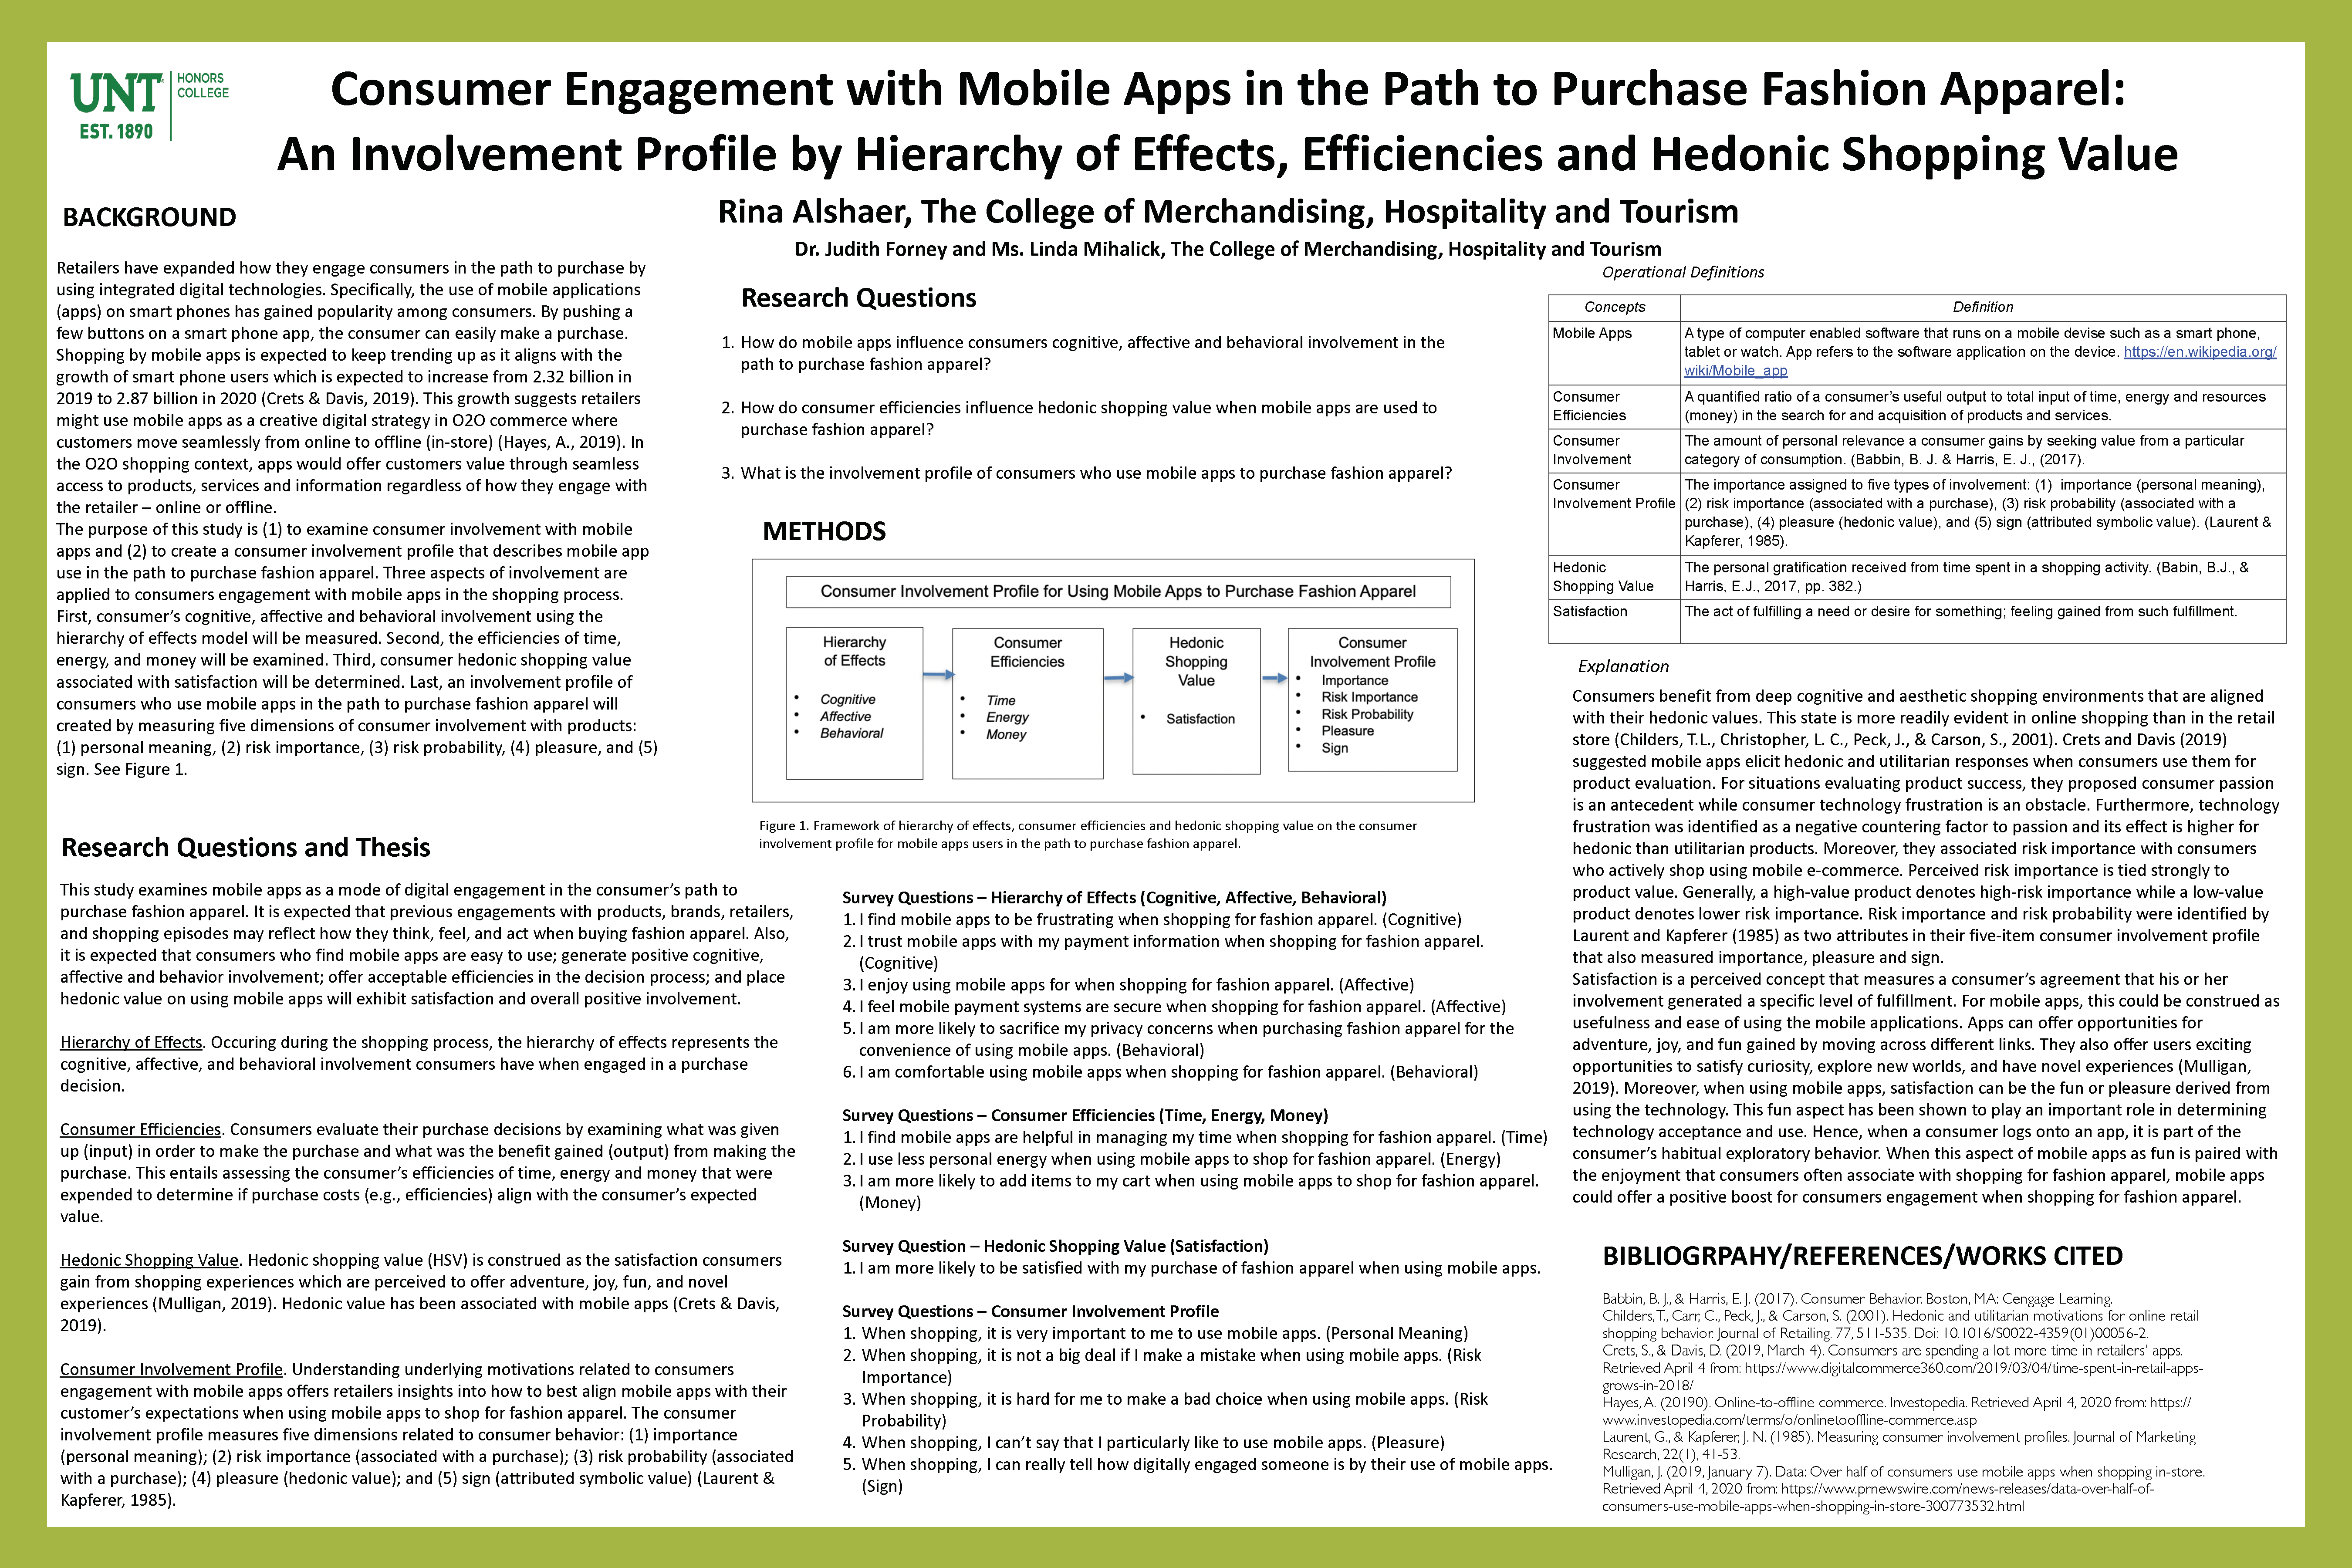 Consumer Engagement with Mobile Apps in the Path to Purchase Fashion Apparel: An Involvement Profile by Hierarchy of Effects